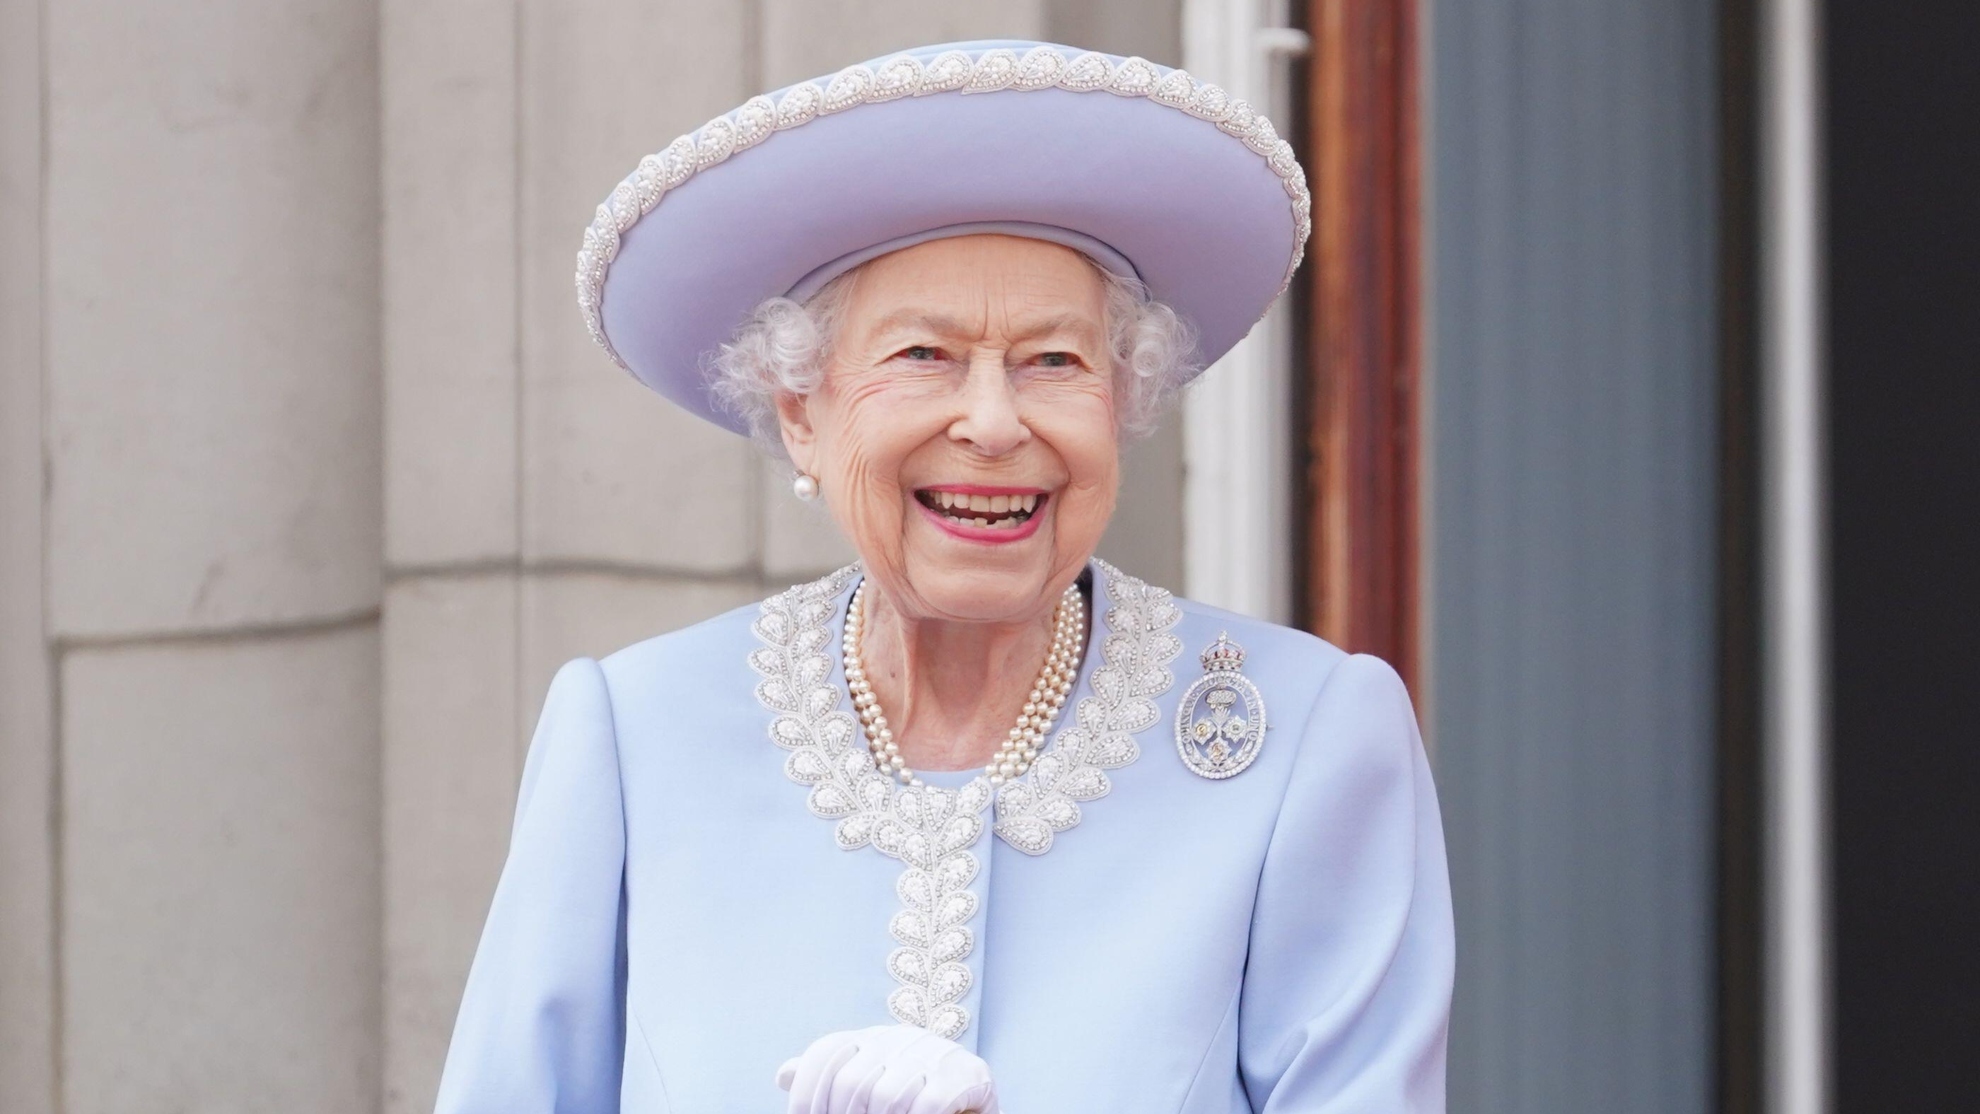 Queen Elizabeth Dies At 96 - The World Mourns For Her Loss